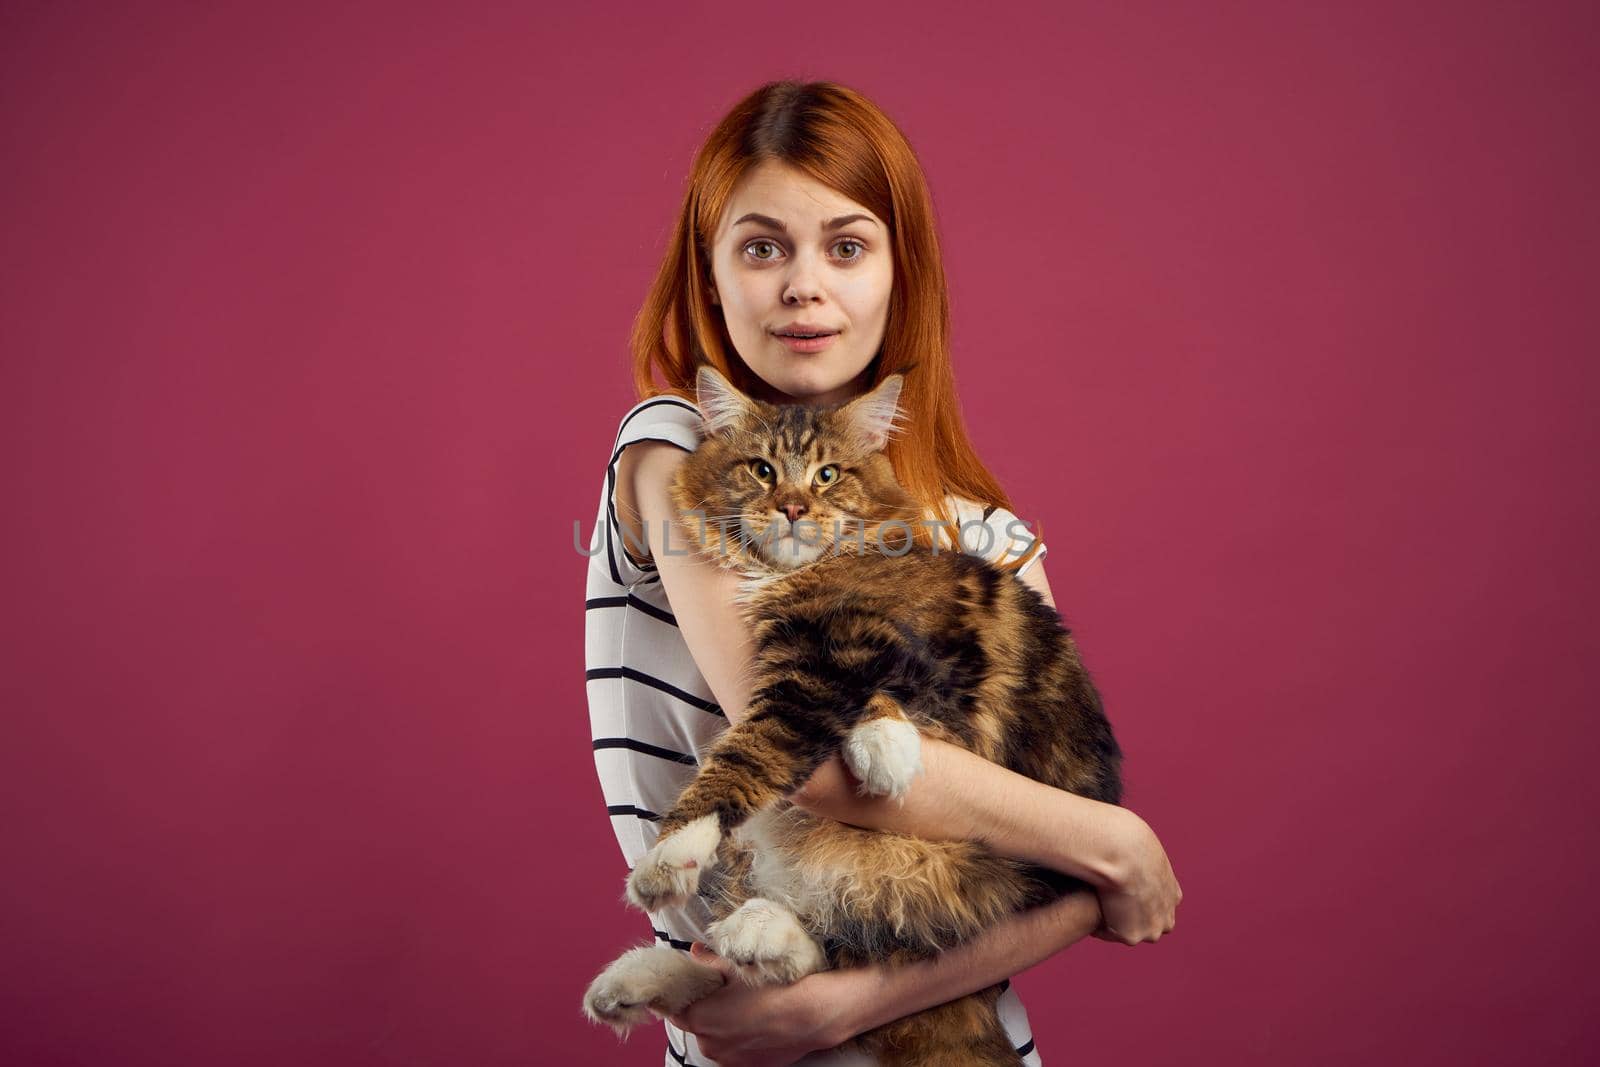 woman holding fluffy cat in her arms pet friendship pink background. High quality photo